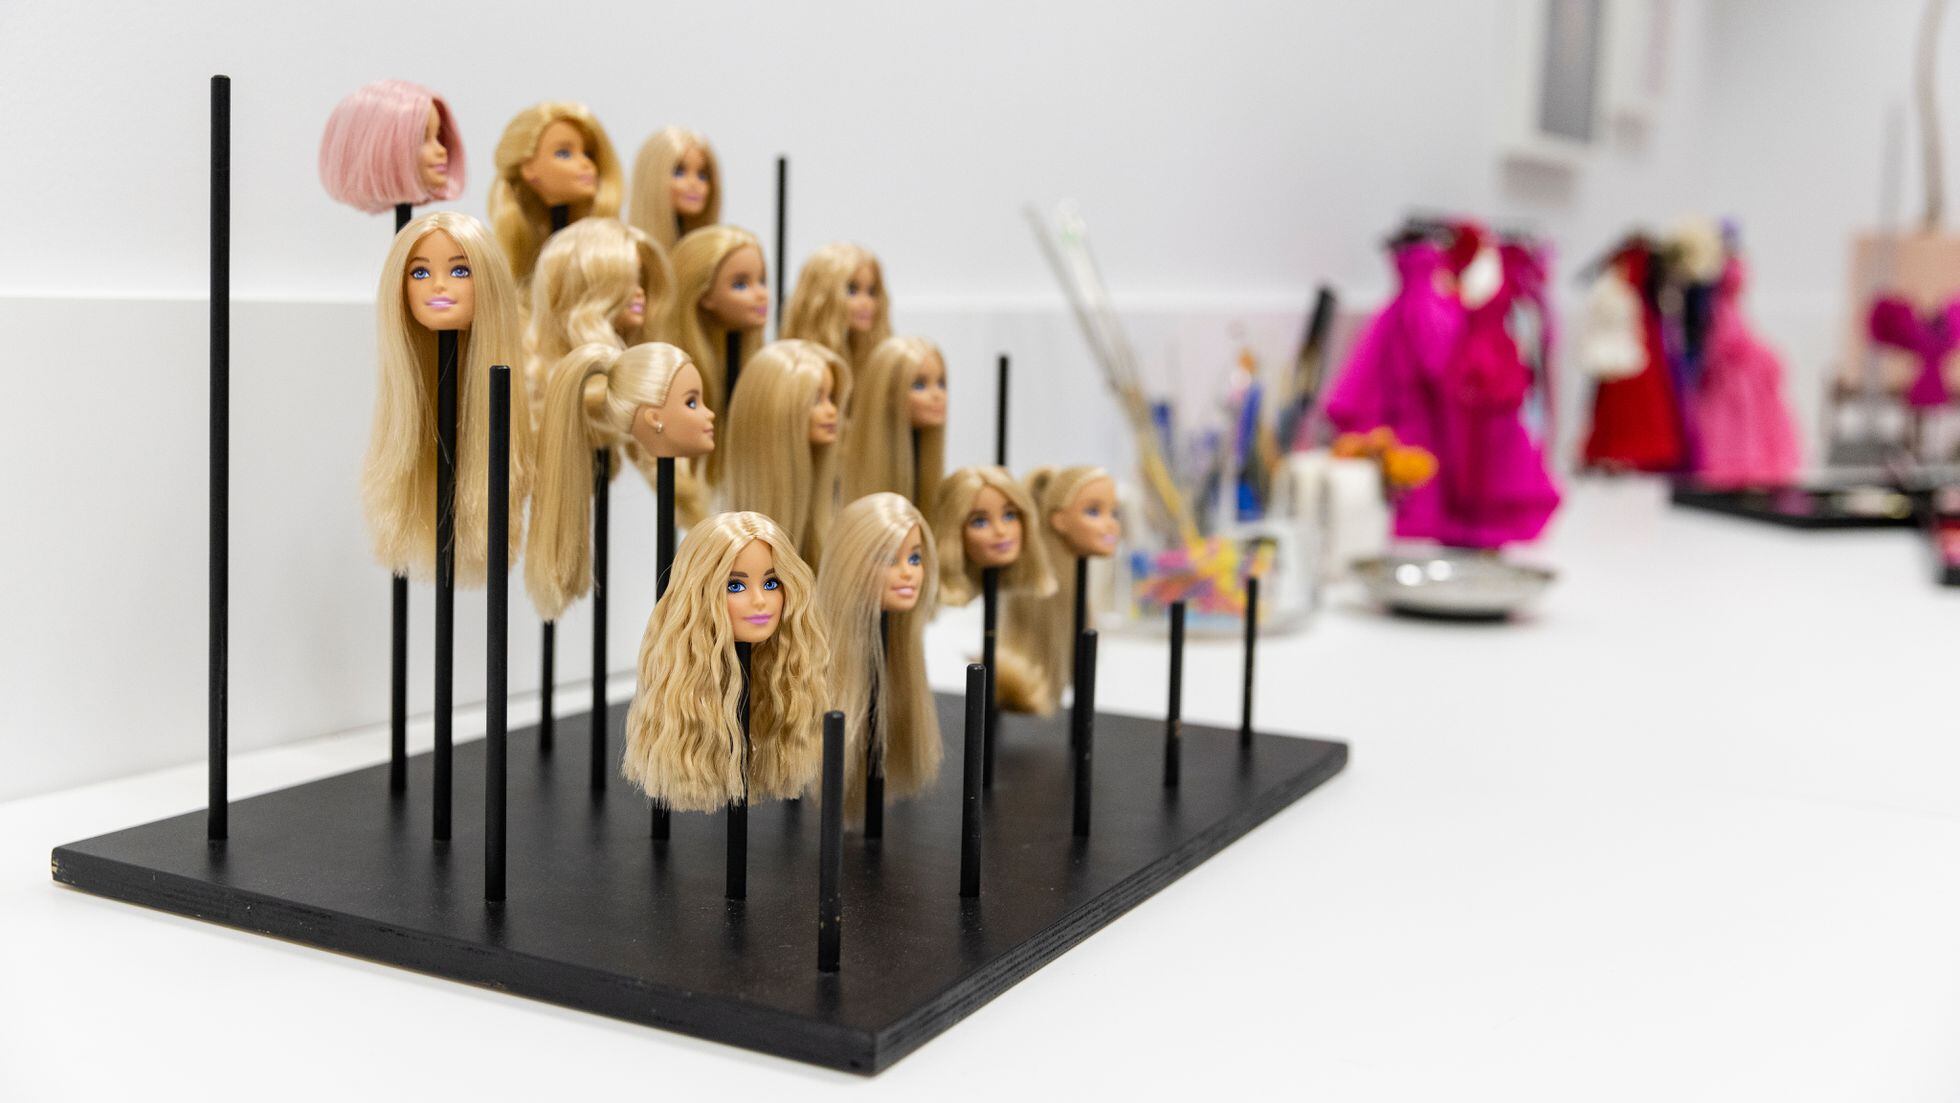 Barbie turns 65, but she's not retiring: EL PAÍS spent a day in her domain,  the Mattel offices where she was created, Culture